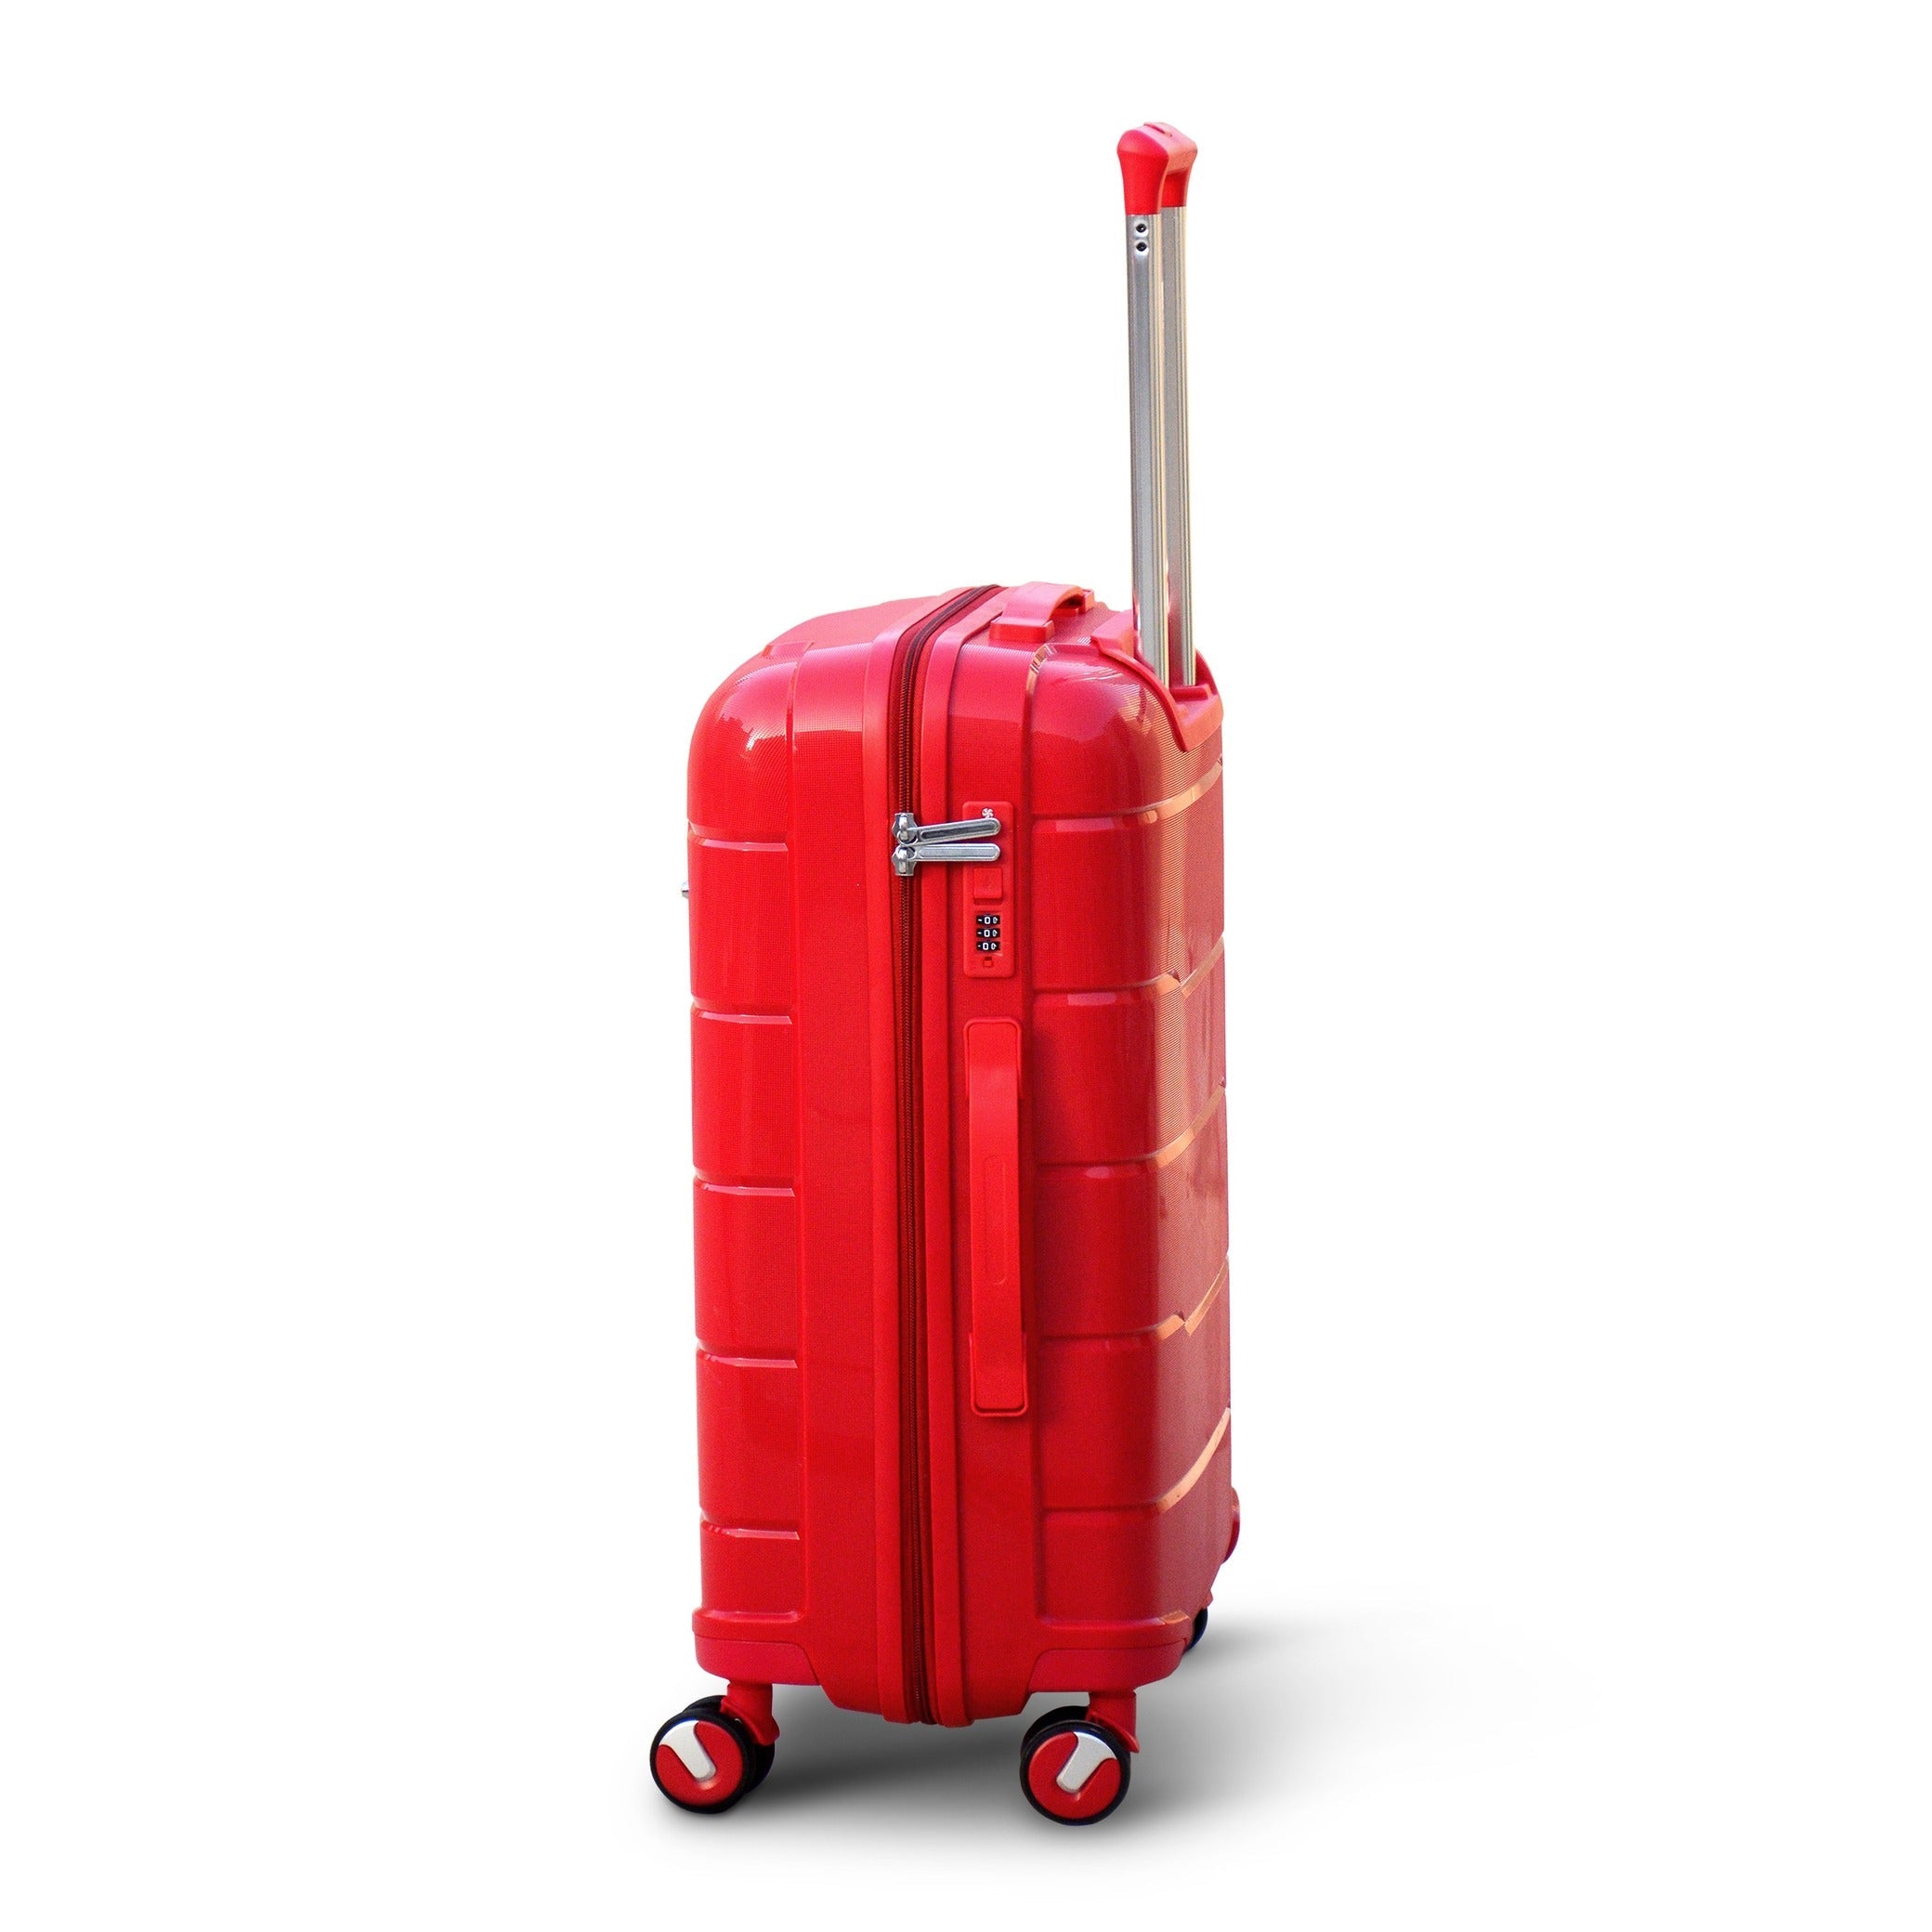 20" Red Colour Ceramic Smooth PP Luggage Lightweight Hard Case Carry On Trolley Bag with Double Spinner Wheel